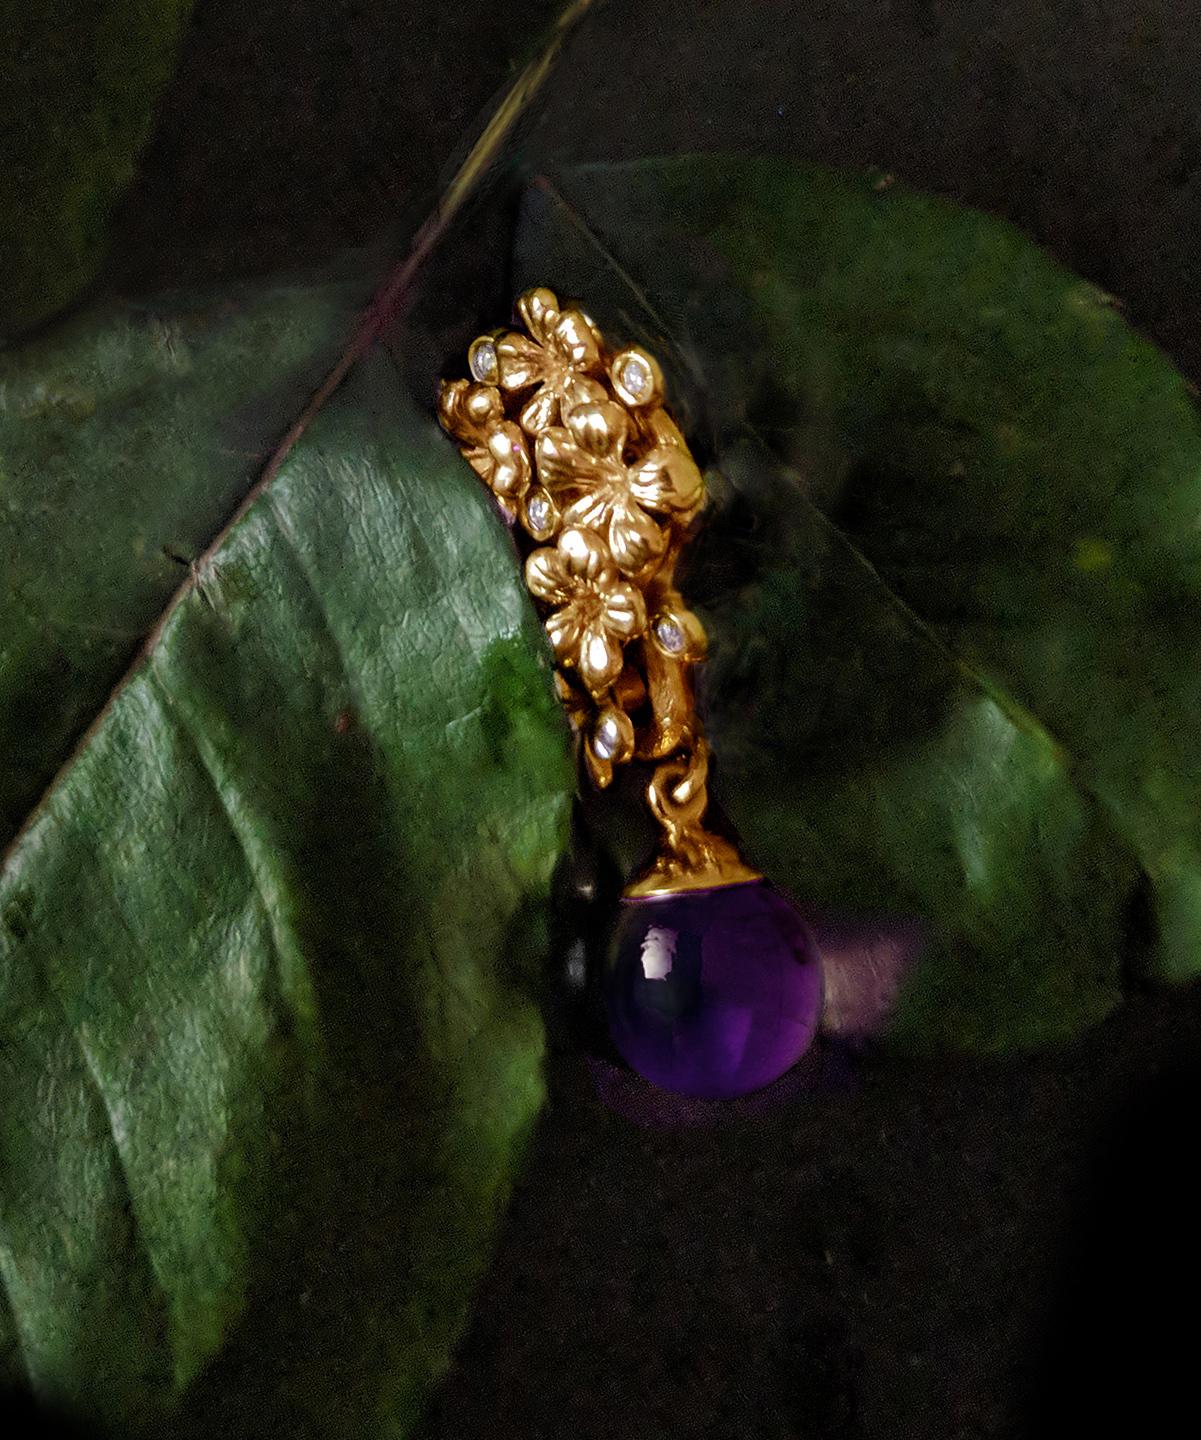 This Plum Blossom brooch is made with 18 karat rose gold, encrusted with 5 round diamonds and a removable cabochon amethyst. It has been featured in a Vogue UA review and we take pride in using top-quality natural diamonds (VS, F-G) sourced from a